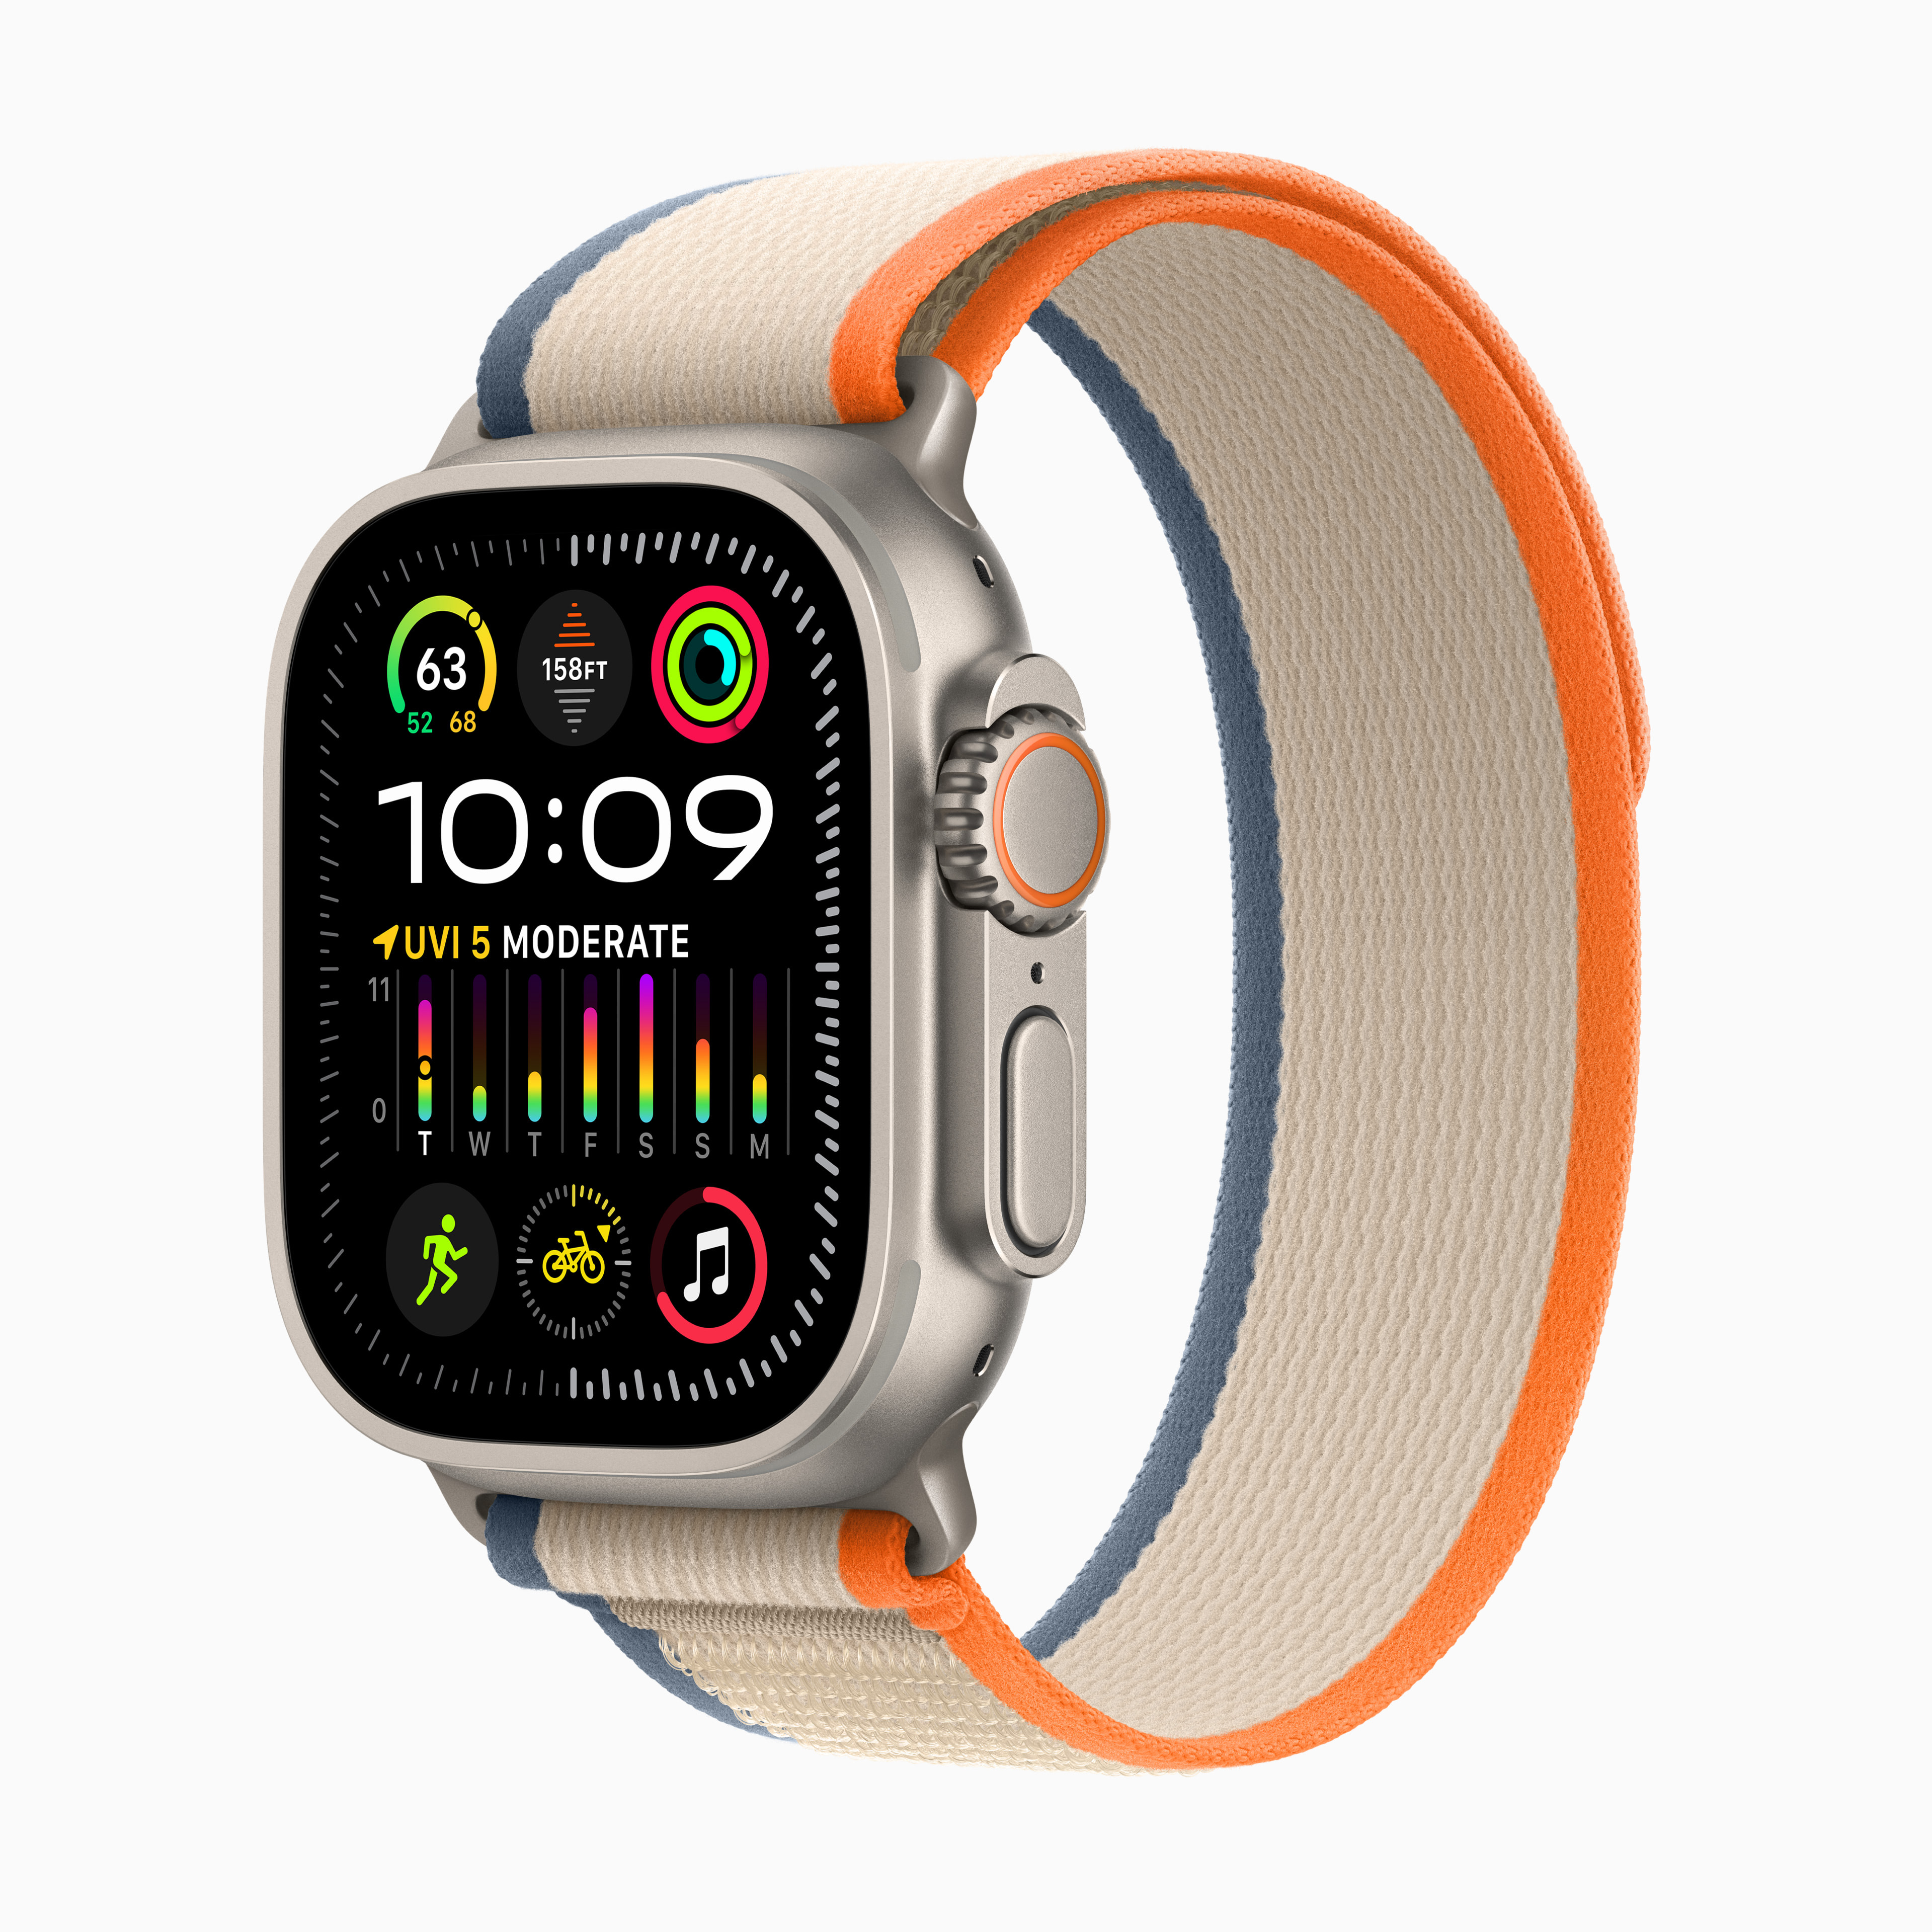 Apple Watch Ultra 2 arrives with new S9 SiP, ondevice Siri, doubletap